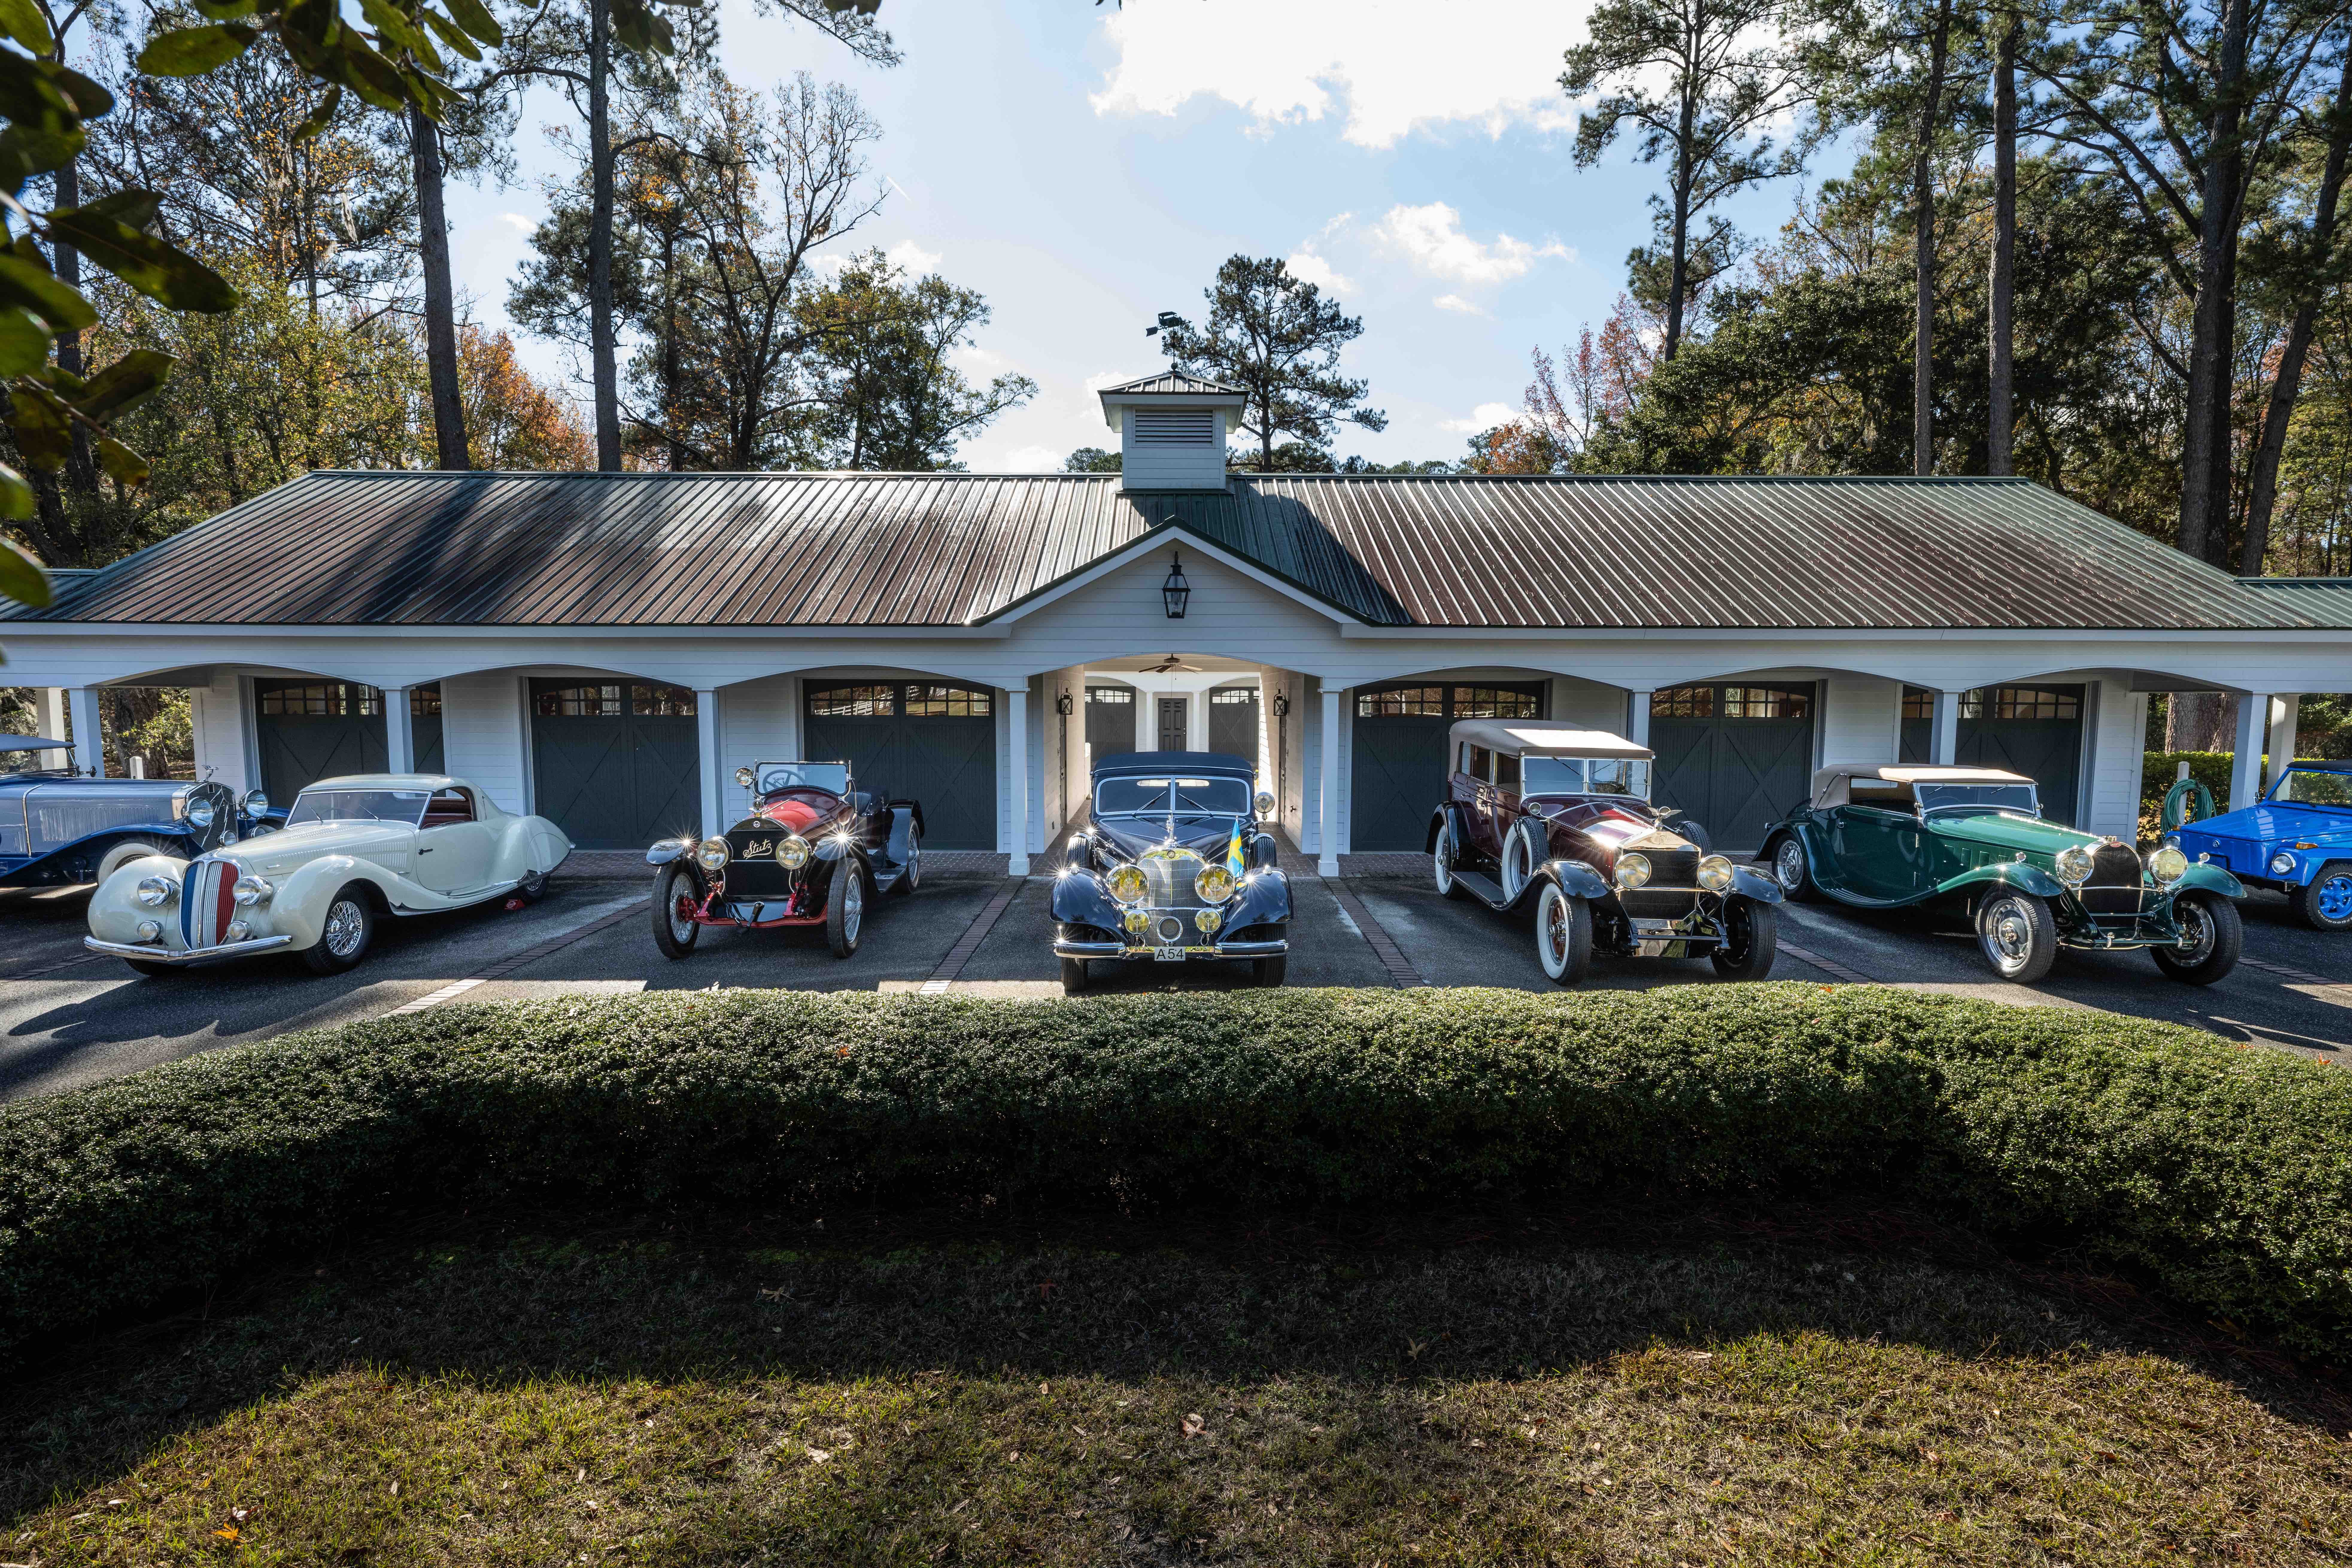 Hagerty Announces Top Collector Vehicle Buys for 2023 - DBusiness